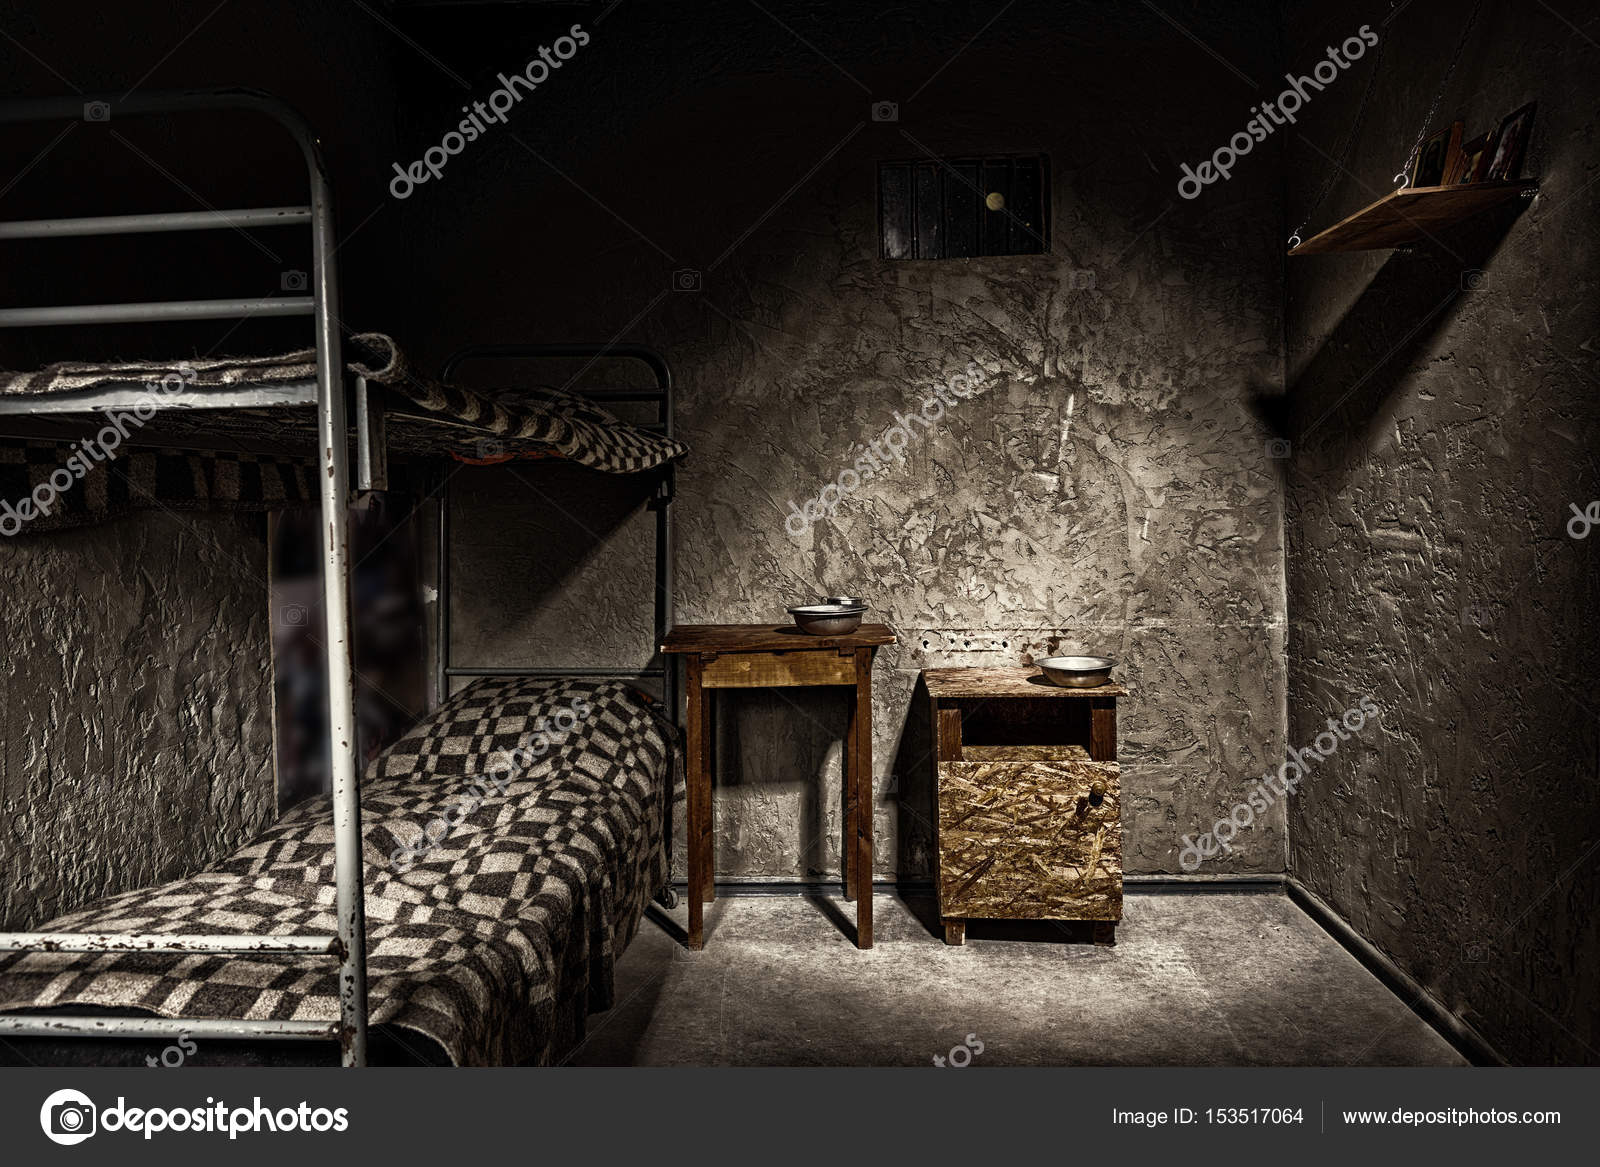 Dark Empty Jail Cell With Iron Bunk Bed, Jail Cell Bunk Beds